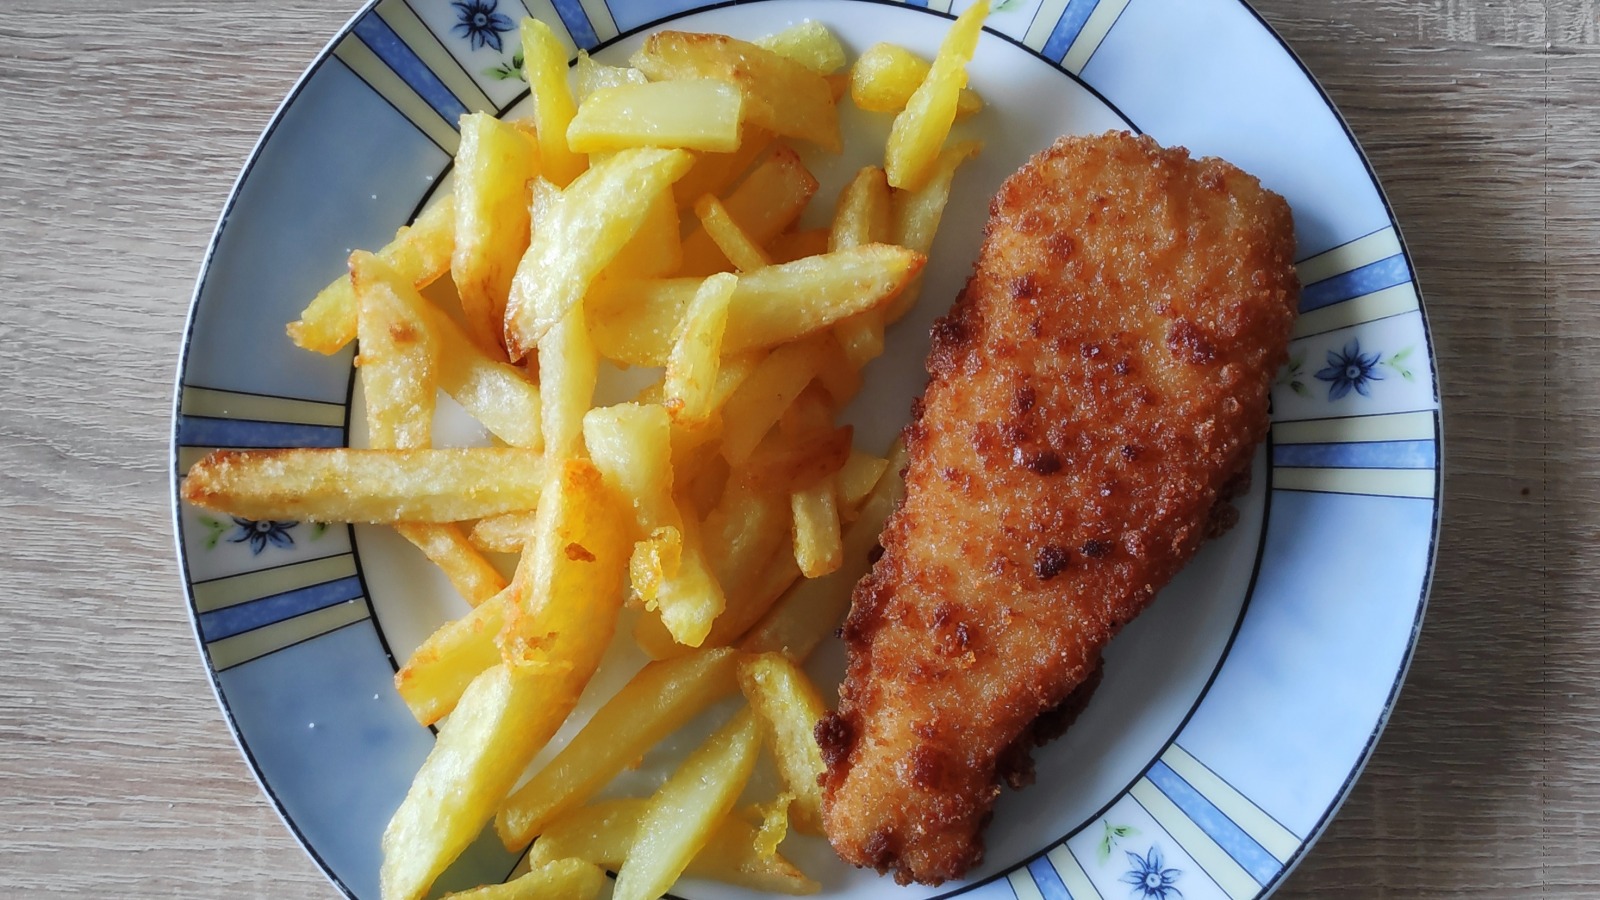 This Simple Trick Will Make Your Fish And Chips Healthier